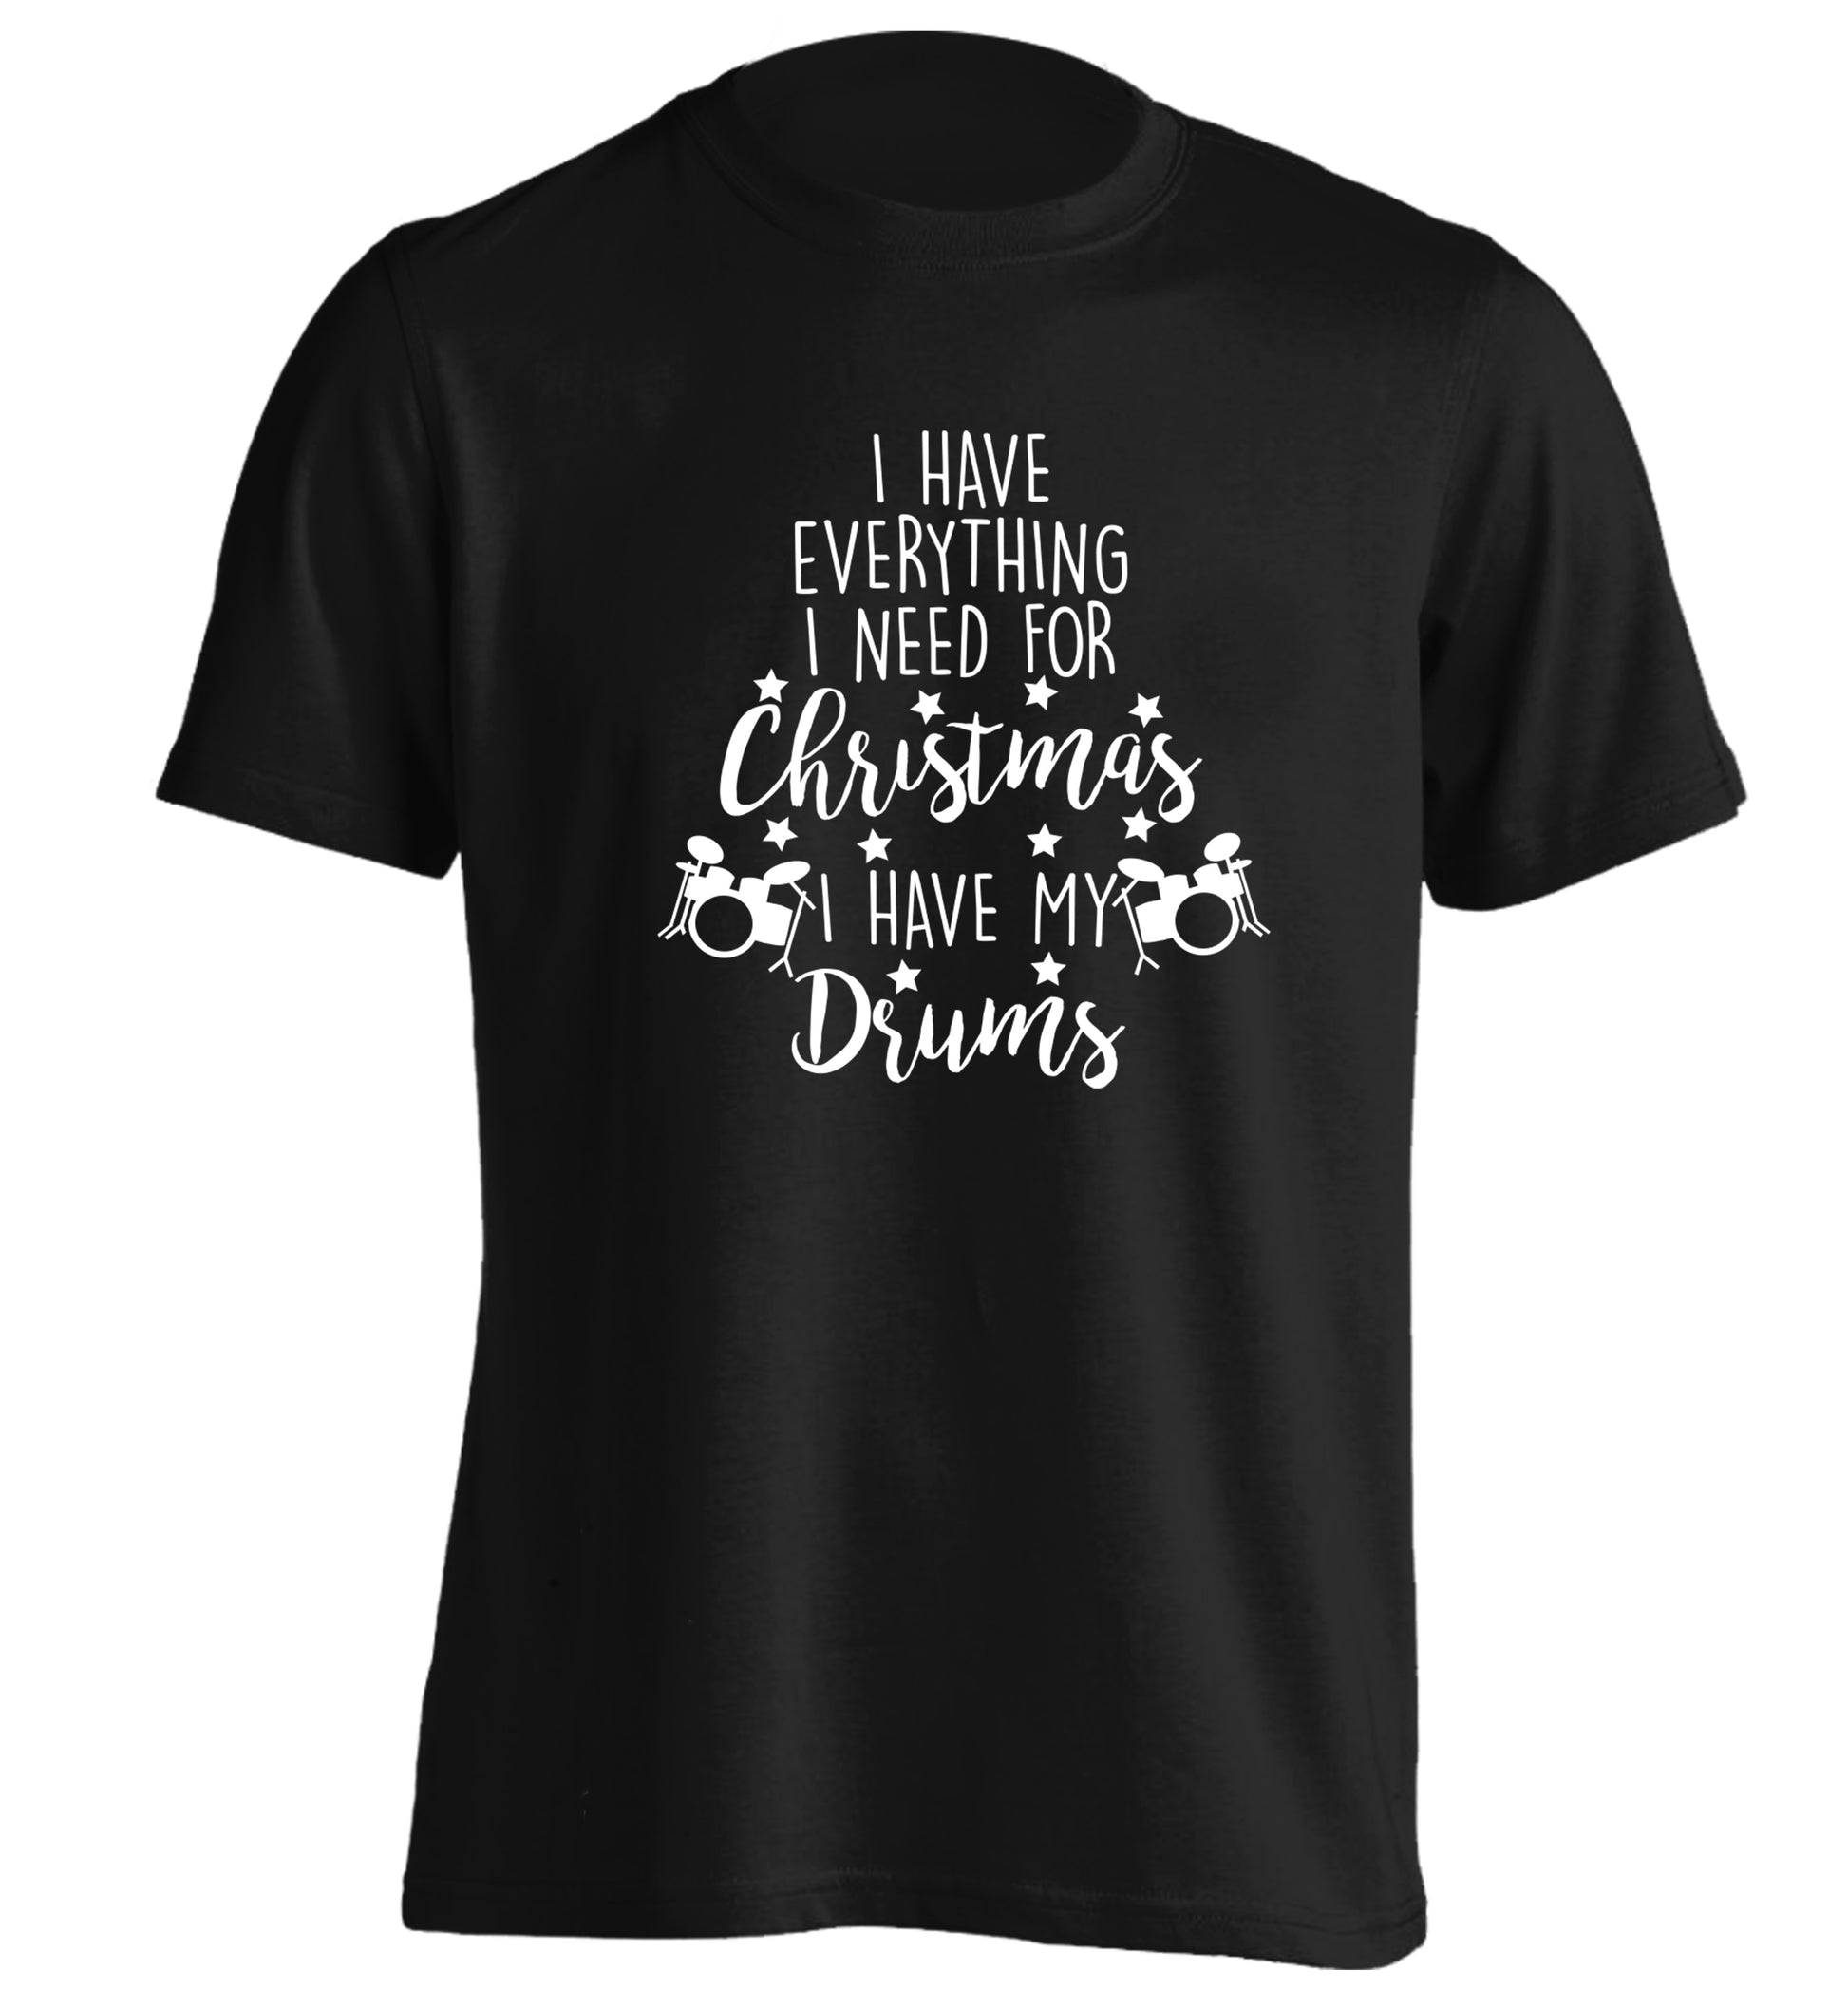 I have everything I need for Christmas I have my drums! adults unisex black Tshirt 2XL